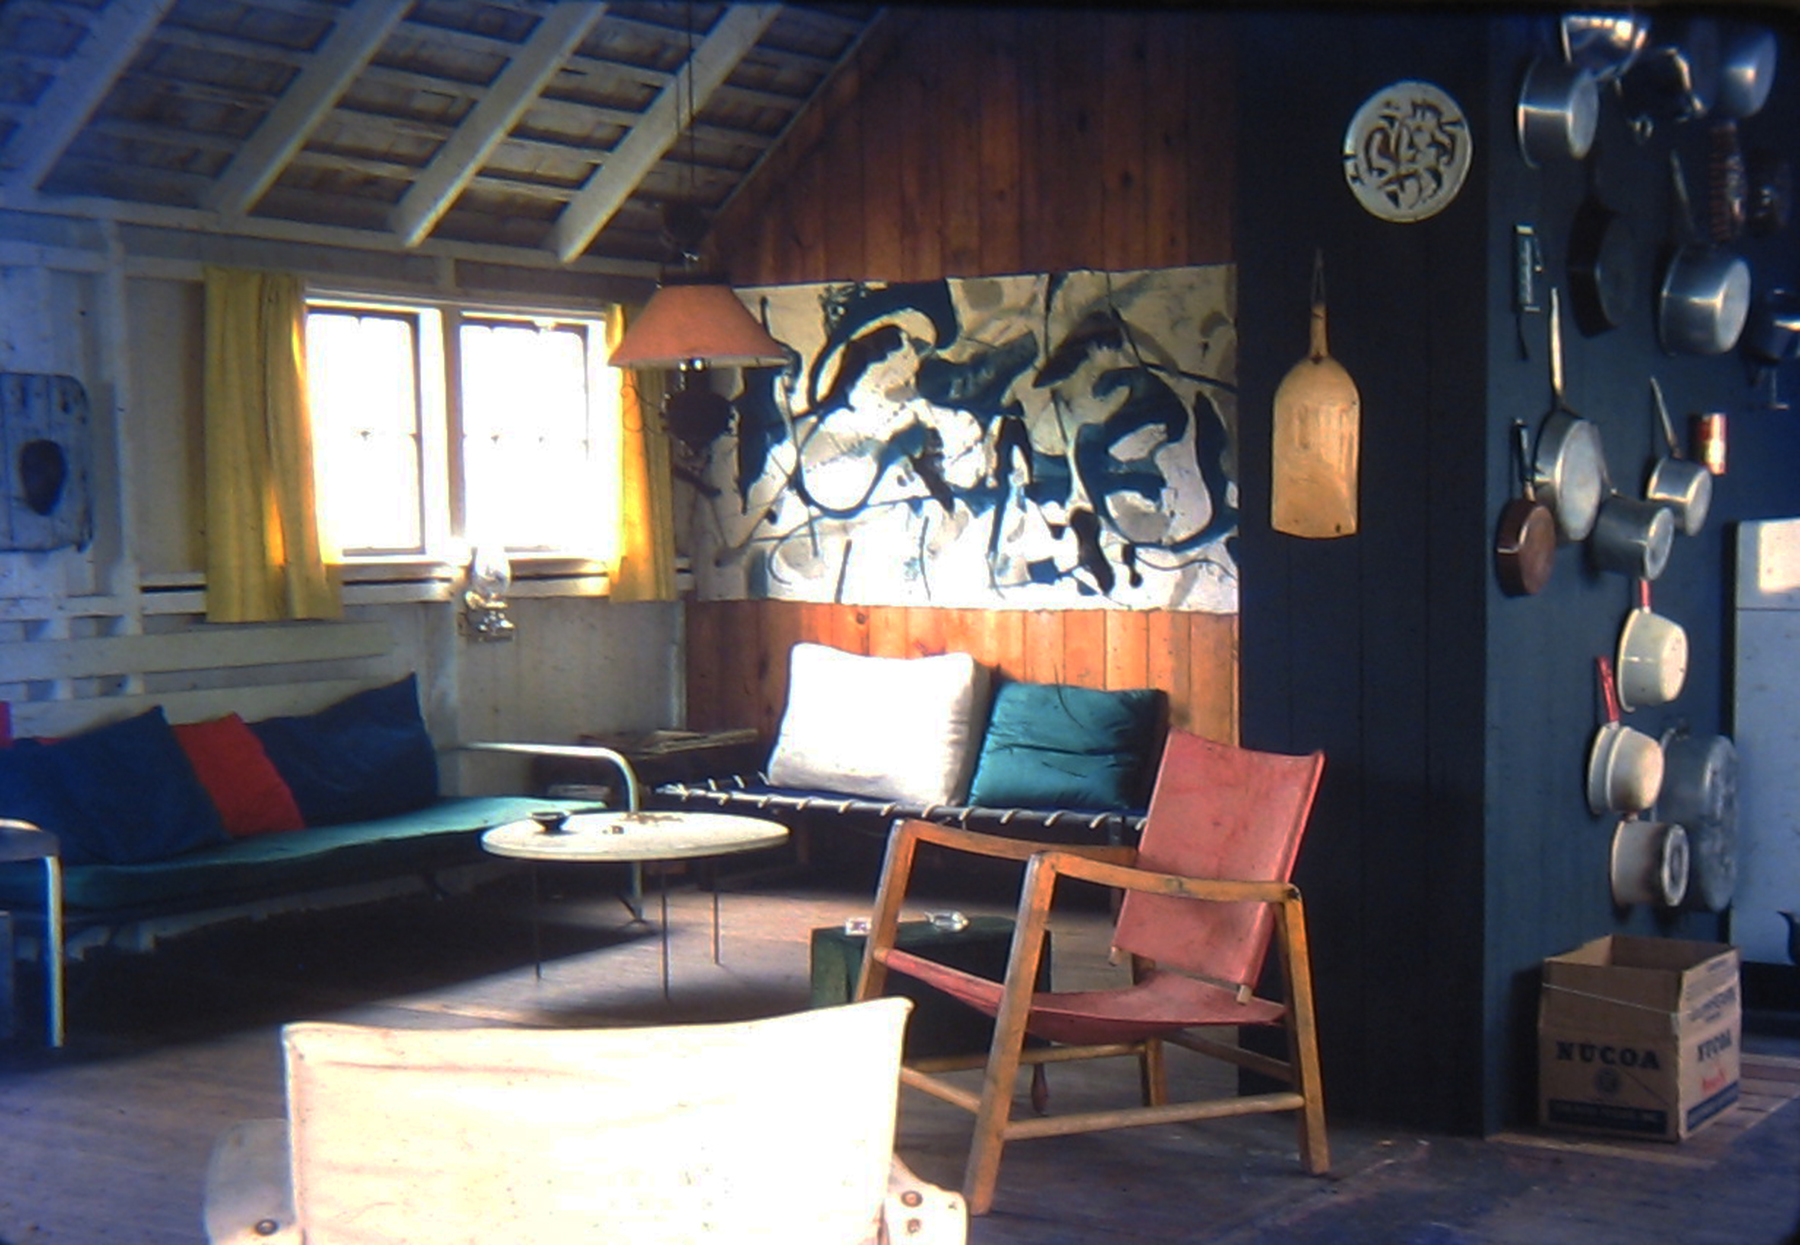 Inside the living room of the home where artists James Brooks and Charlotte Park once lived. COURTESY HELEN HARRISON